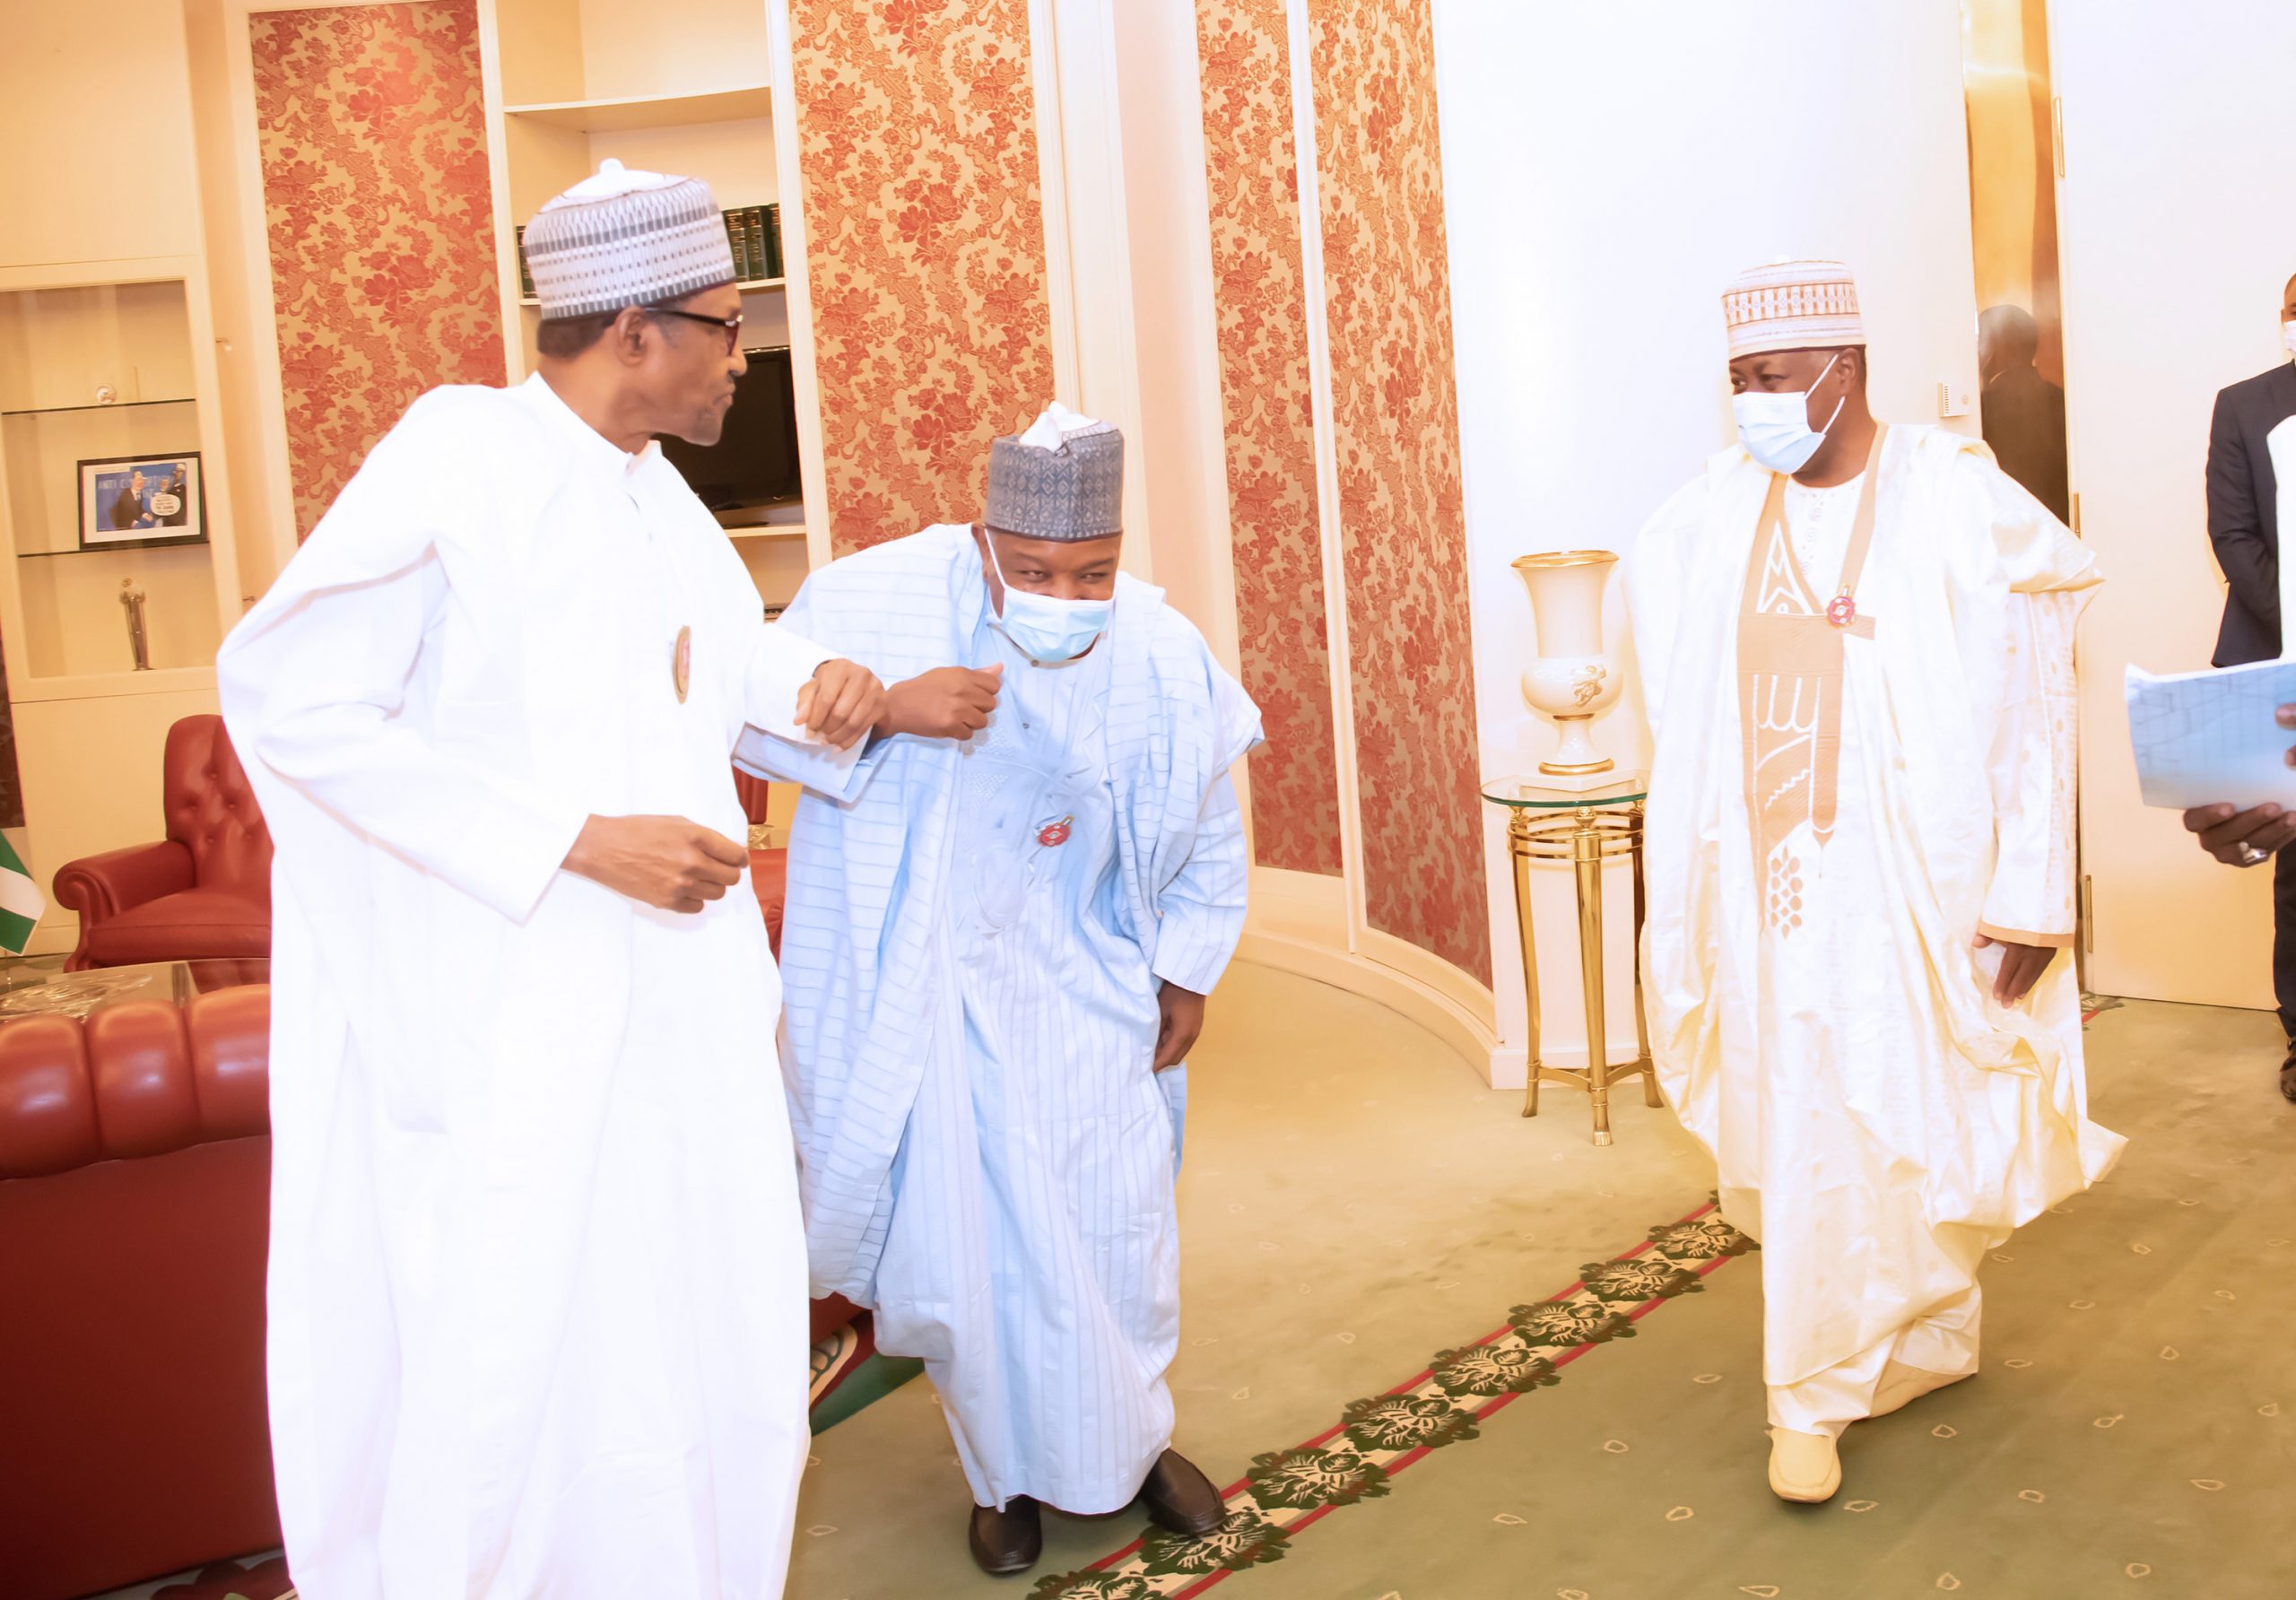 PRESIDENT BUHARI RECEIVES APC CHAIR CARETAKER AND TWO OTHERS 0A